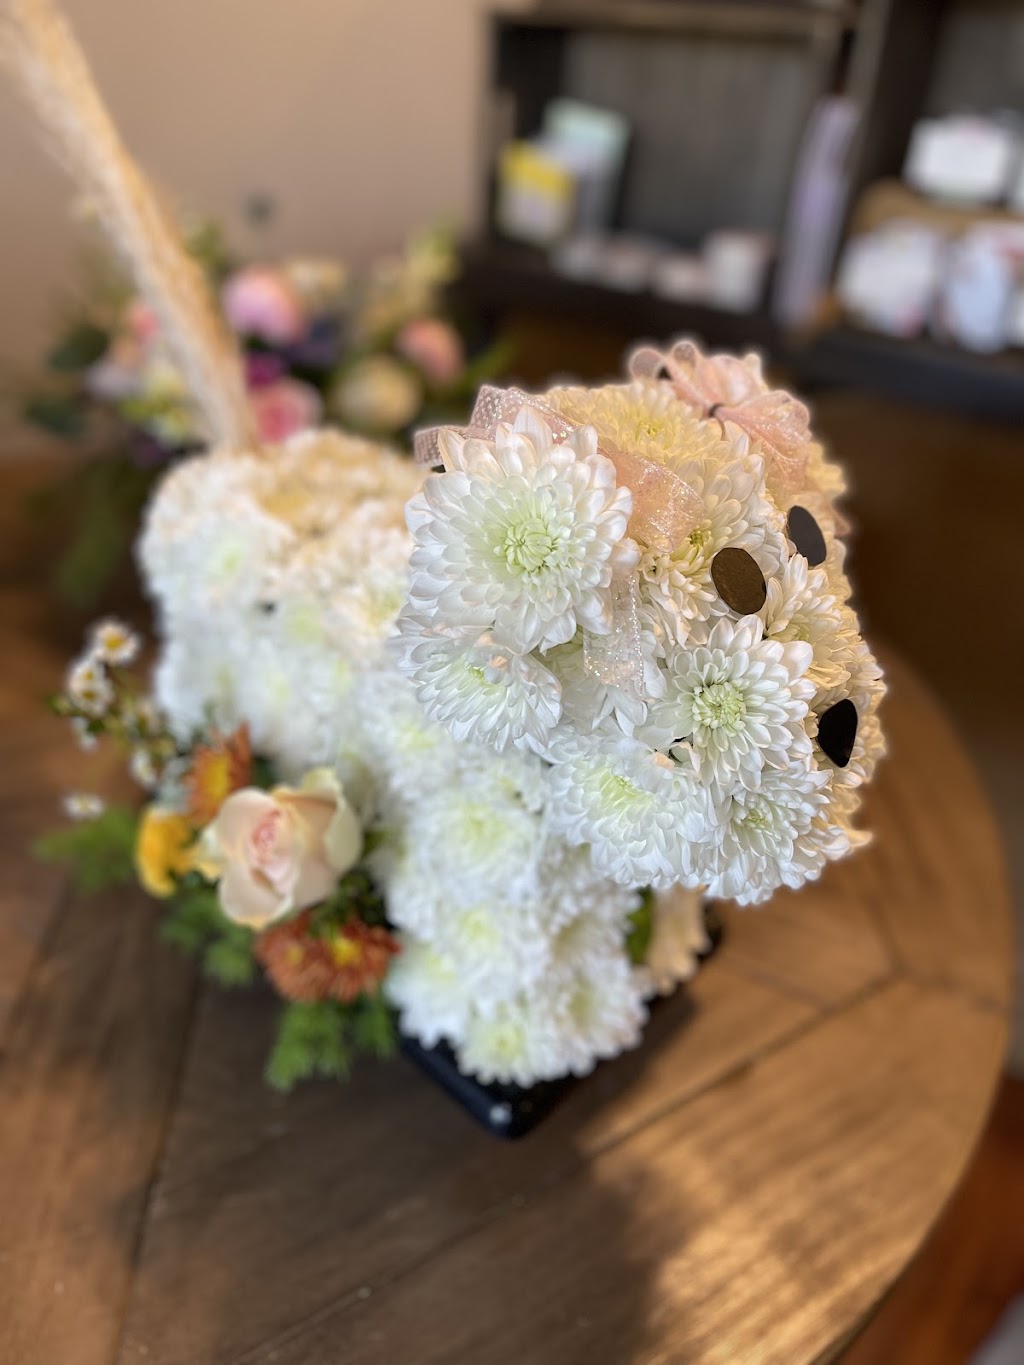 Bloom House Flowers and Gifts | 24228 Crenshaw Blvd, Torrance, CA 90505 | Phone: (310) 956-1646